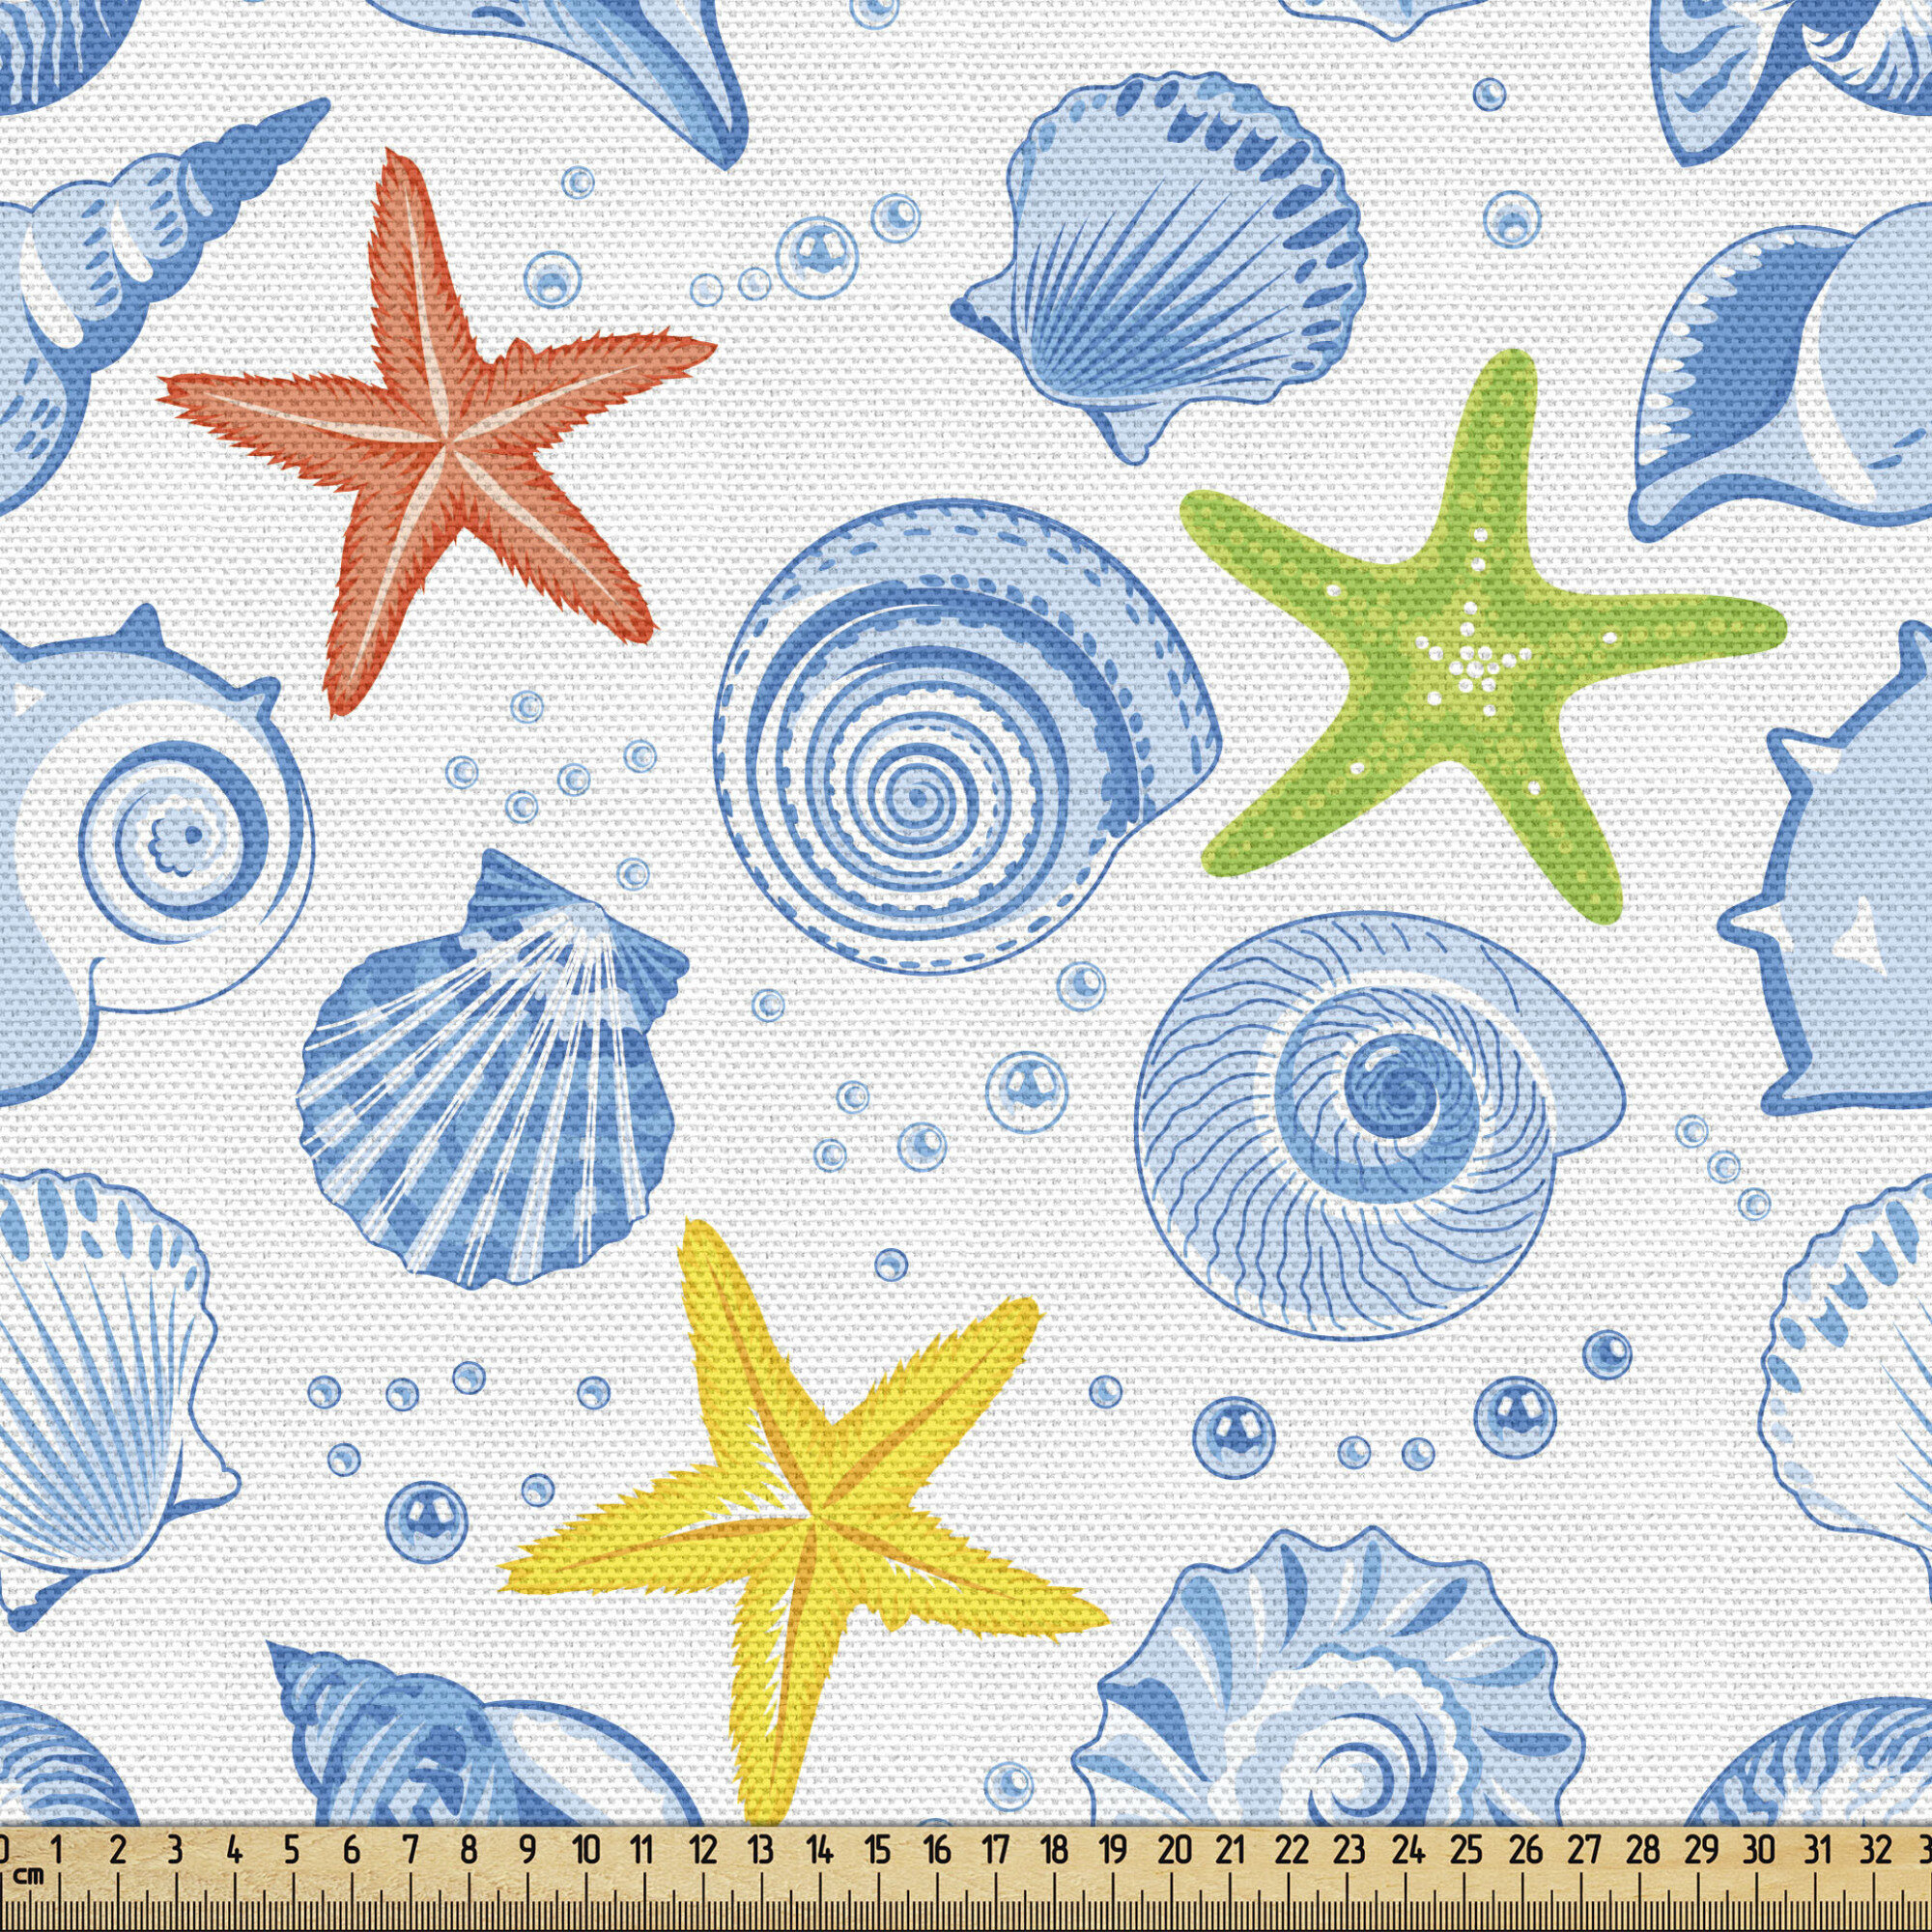 Nautical Crab Starfish Boat Collage Cotton Fabric Windham Shoreline By The Yard 